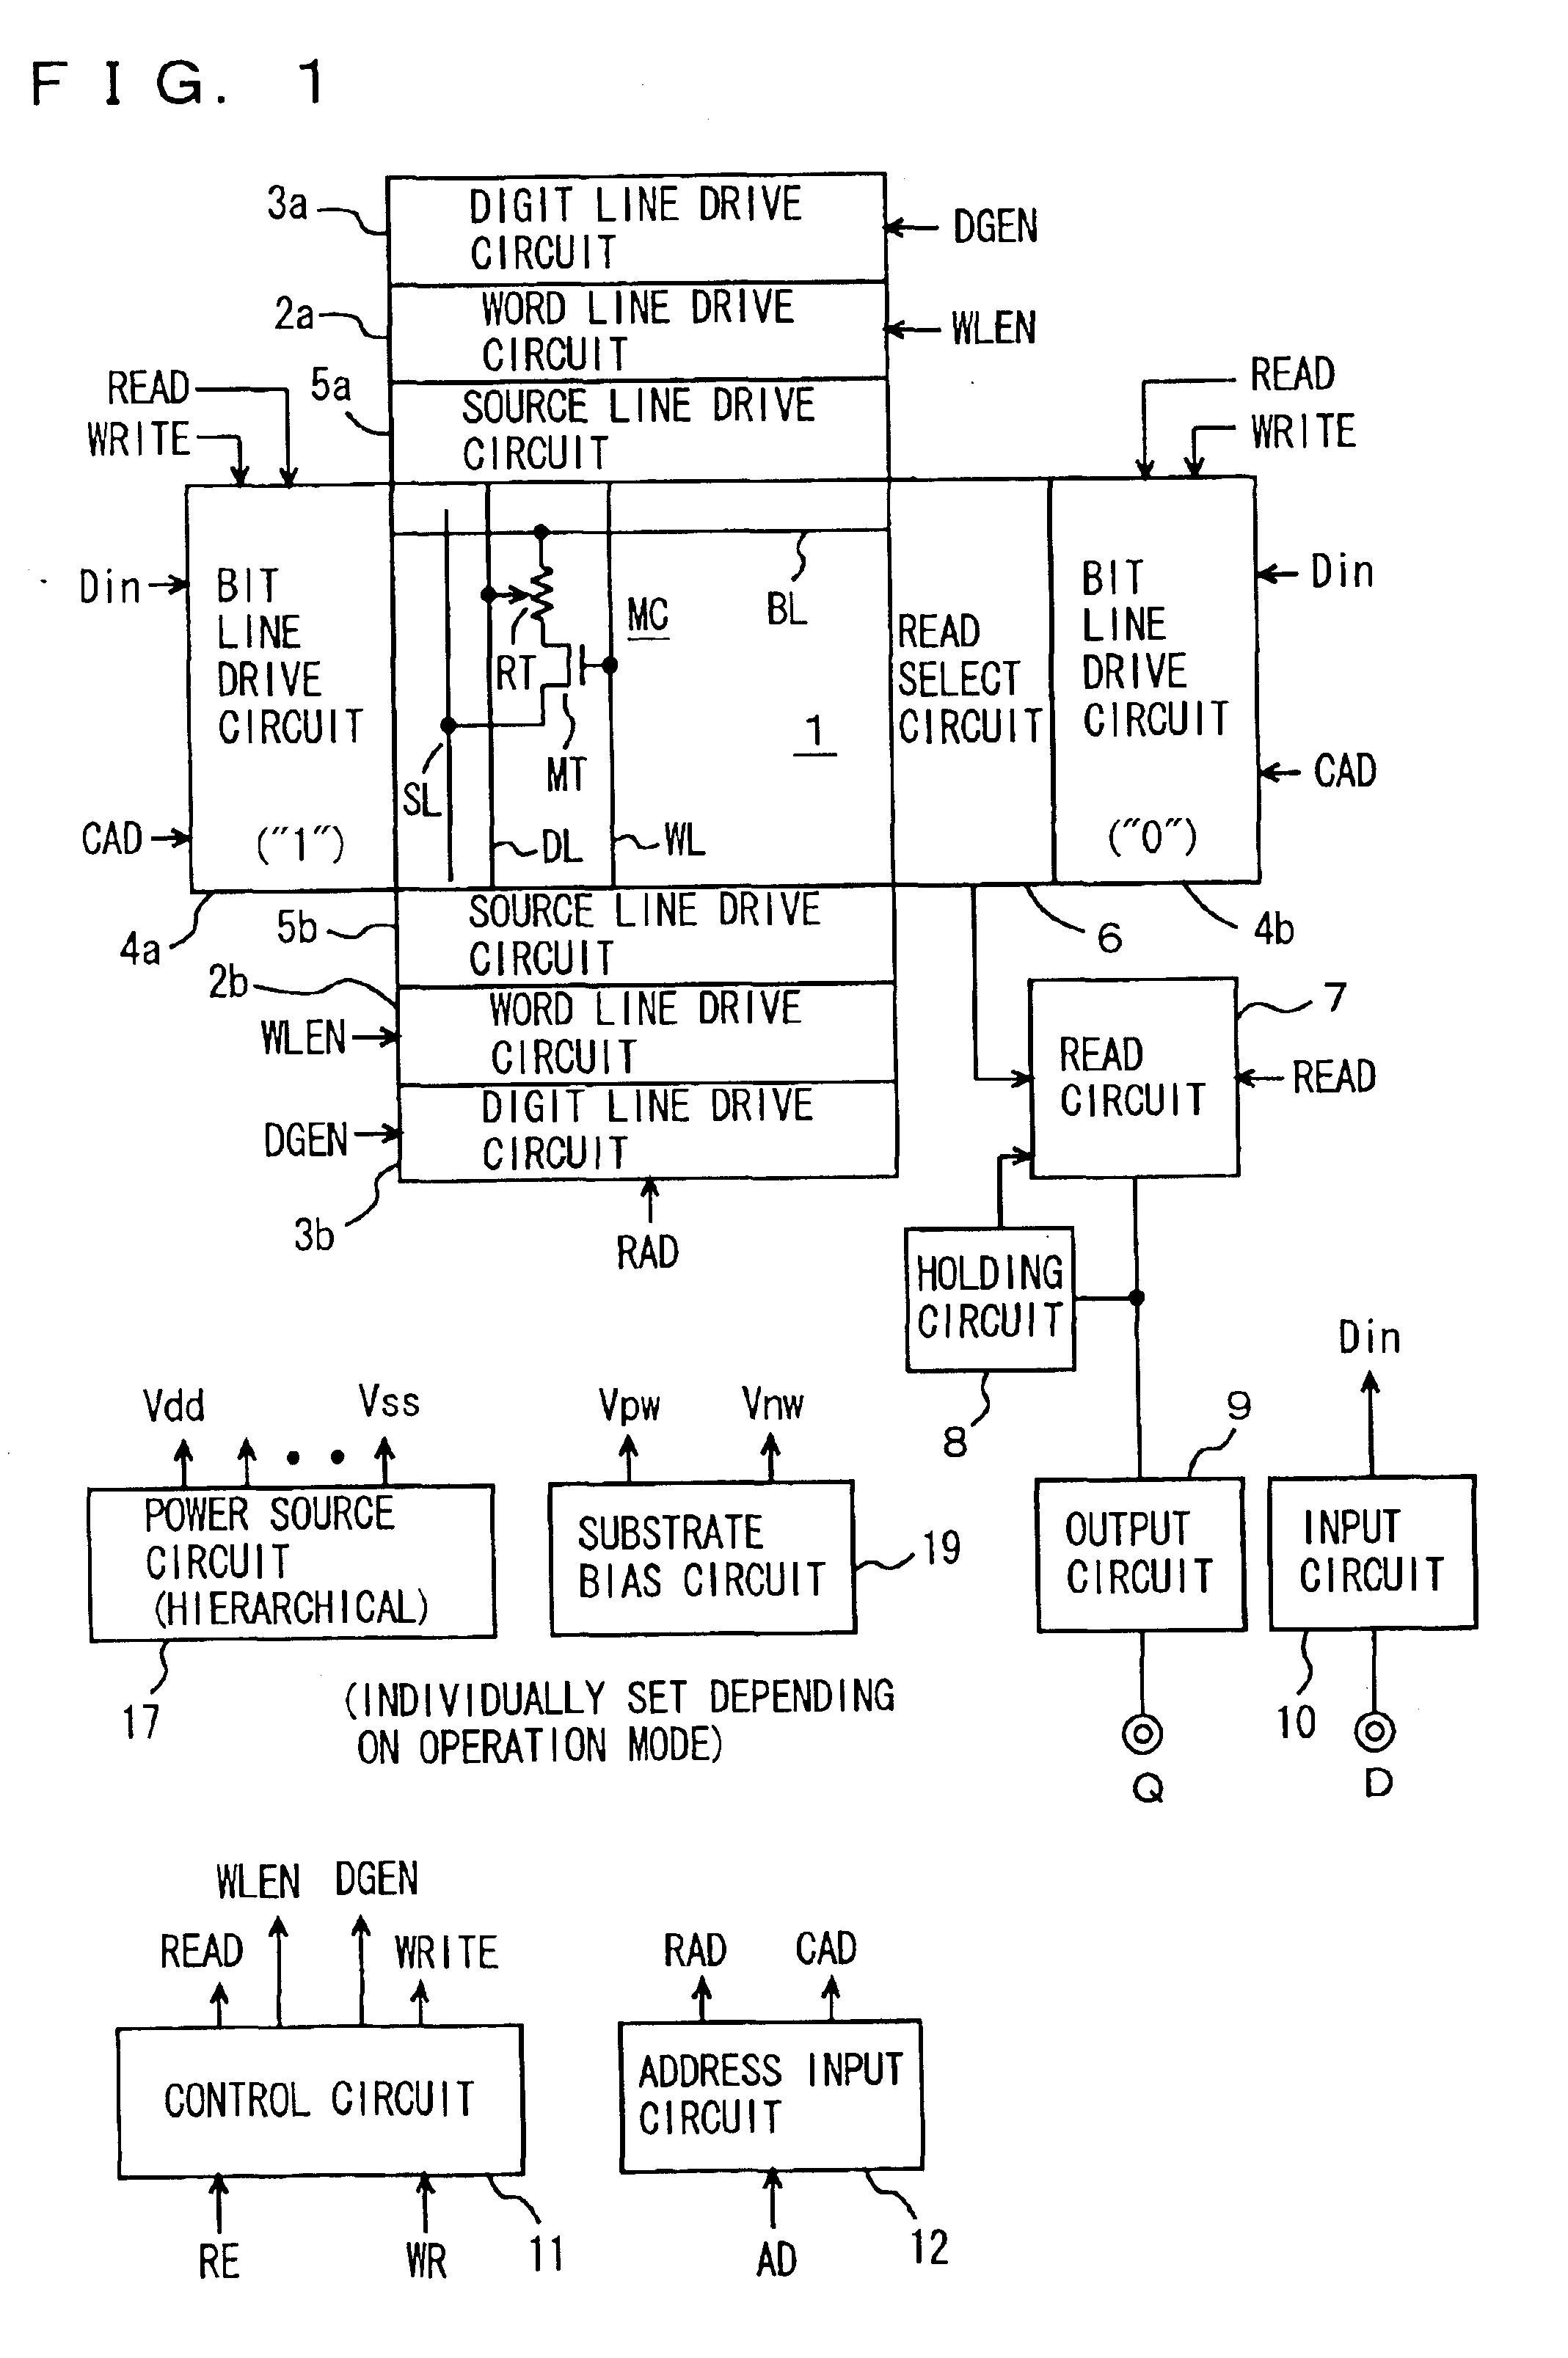 Semiconductor memory device operating with low current consumption